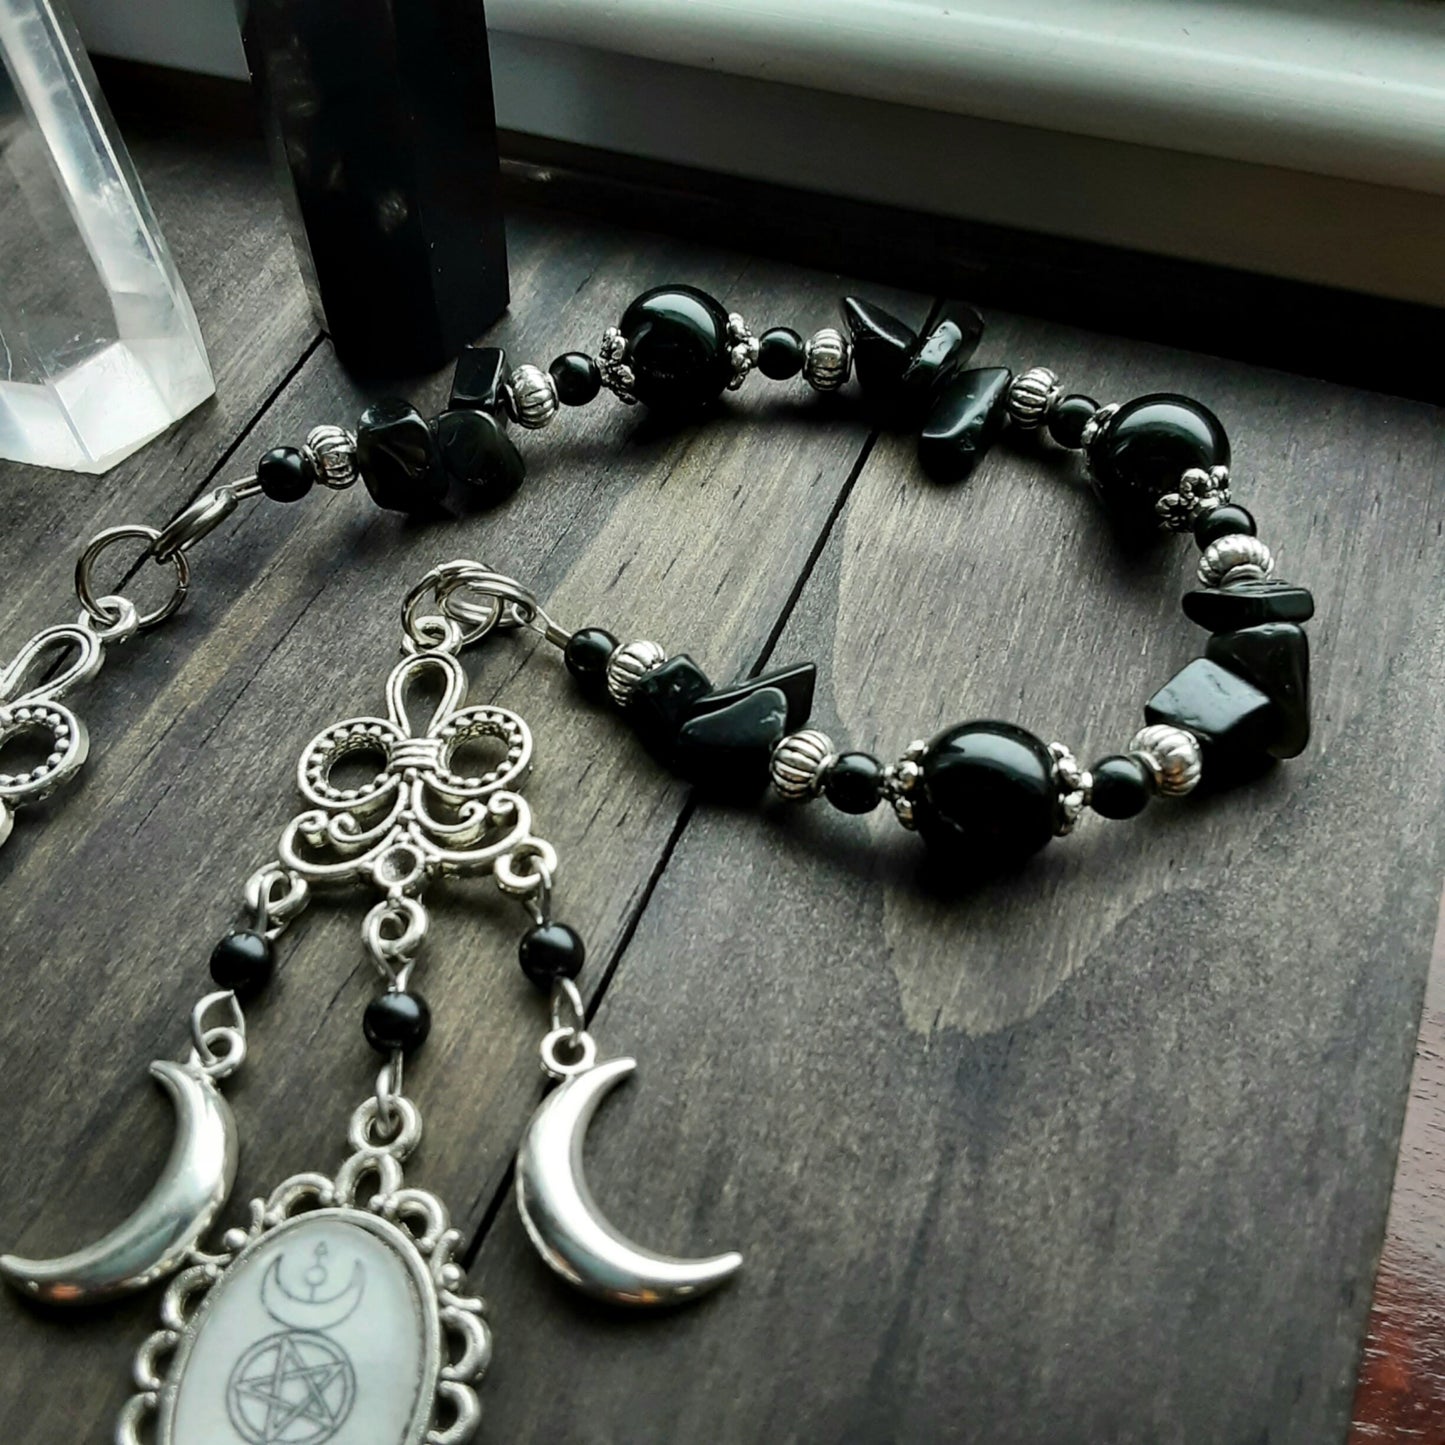 Hekate prayer beads with Obsidian, Witch&#39;s ladder with Raven, Pentacle, Witch knot, Crescent moons and Triple Moon Goddess charm, Pagan